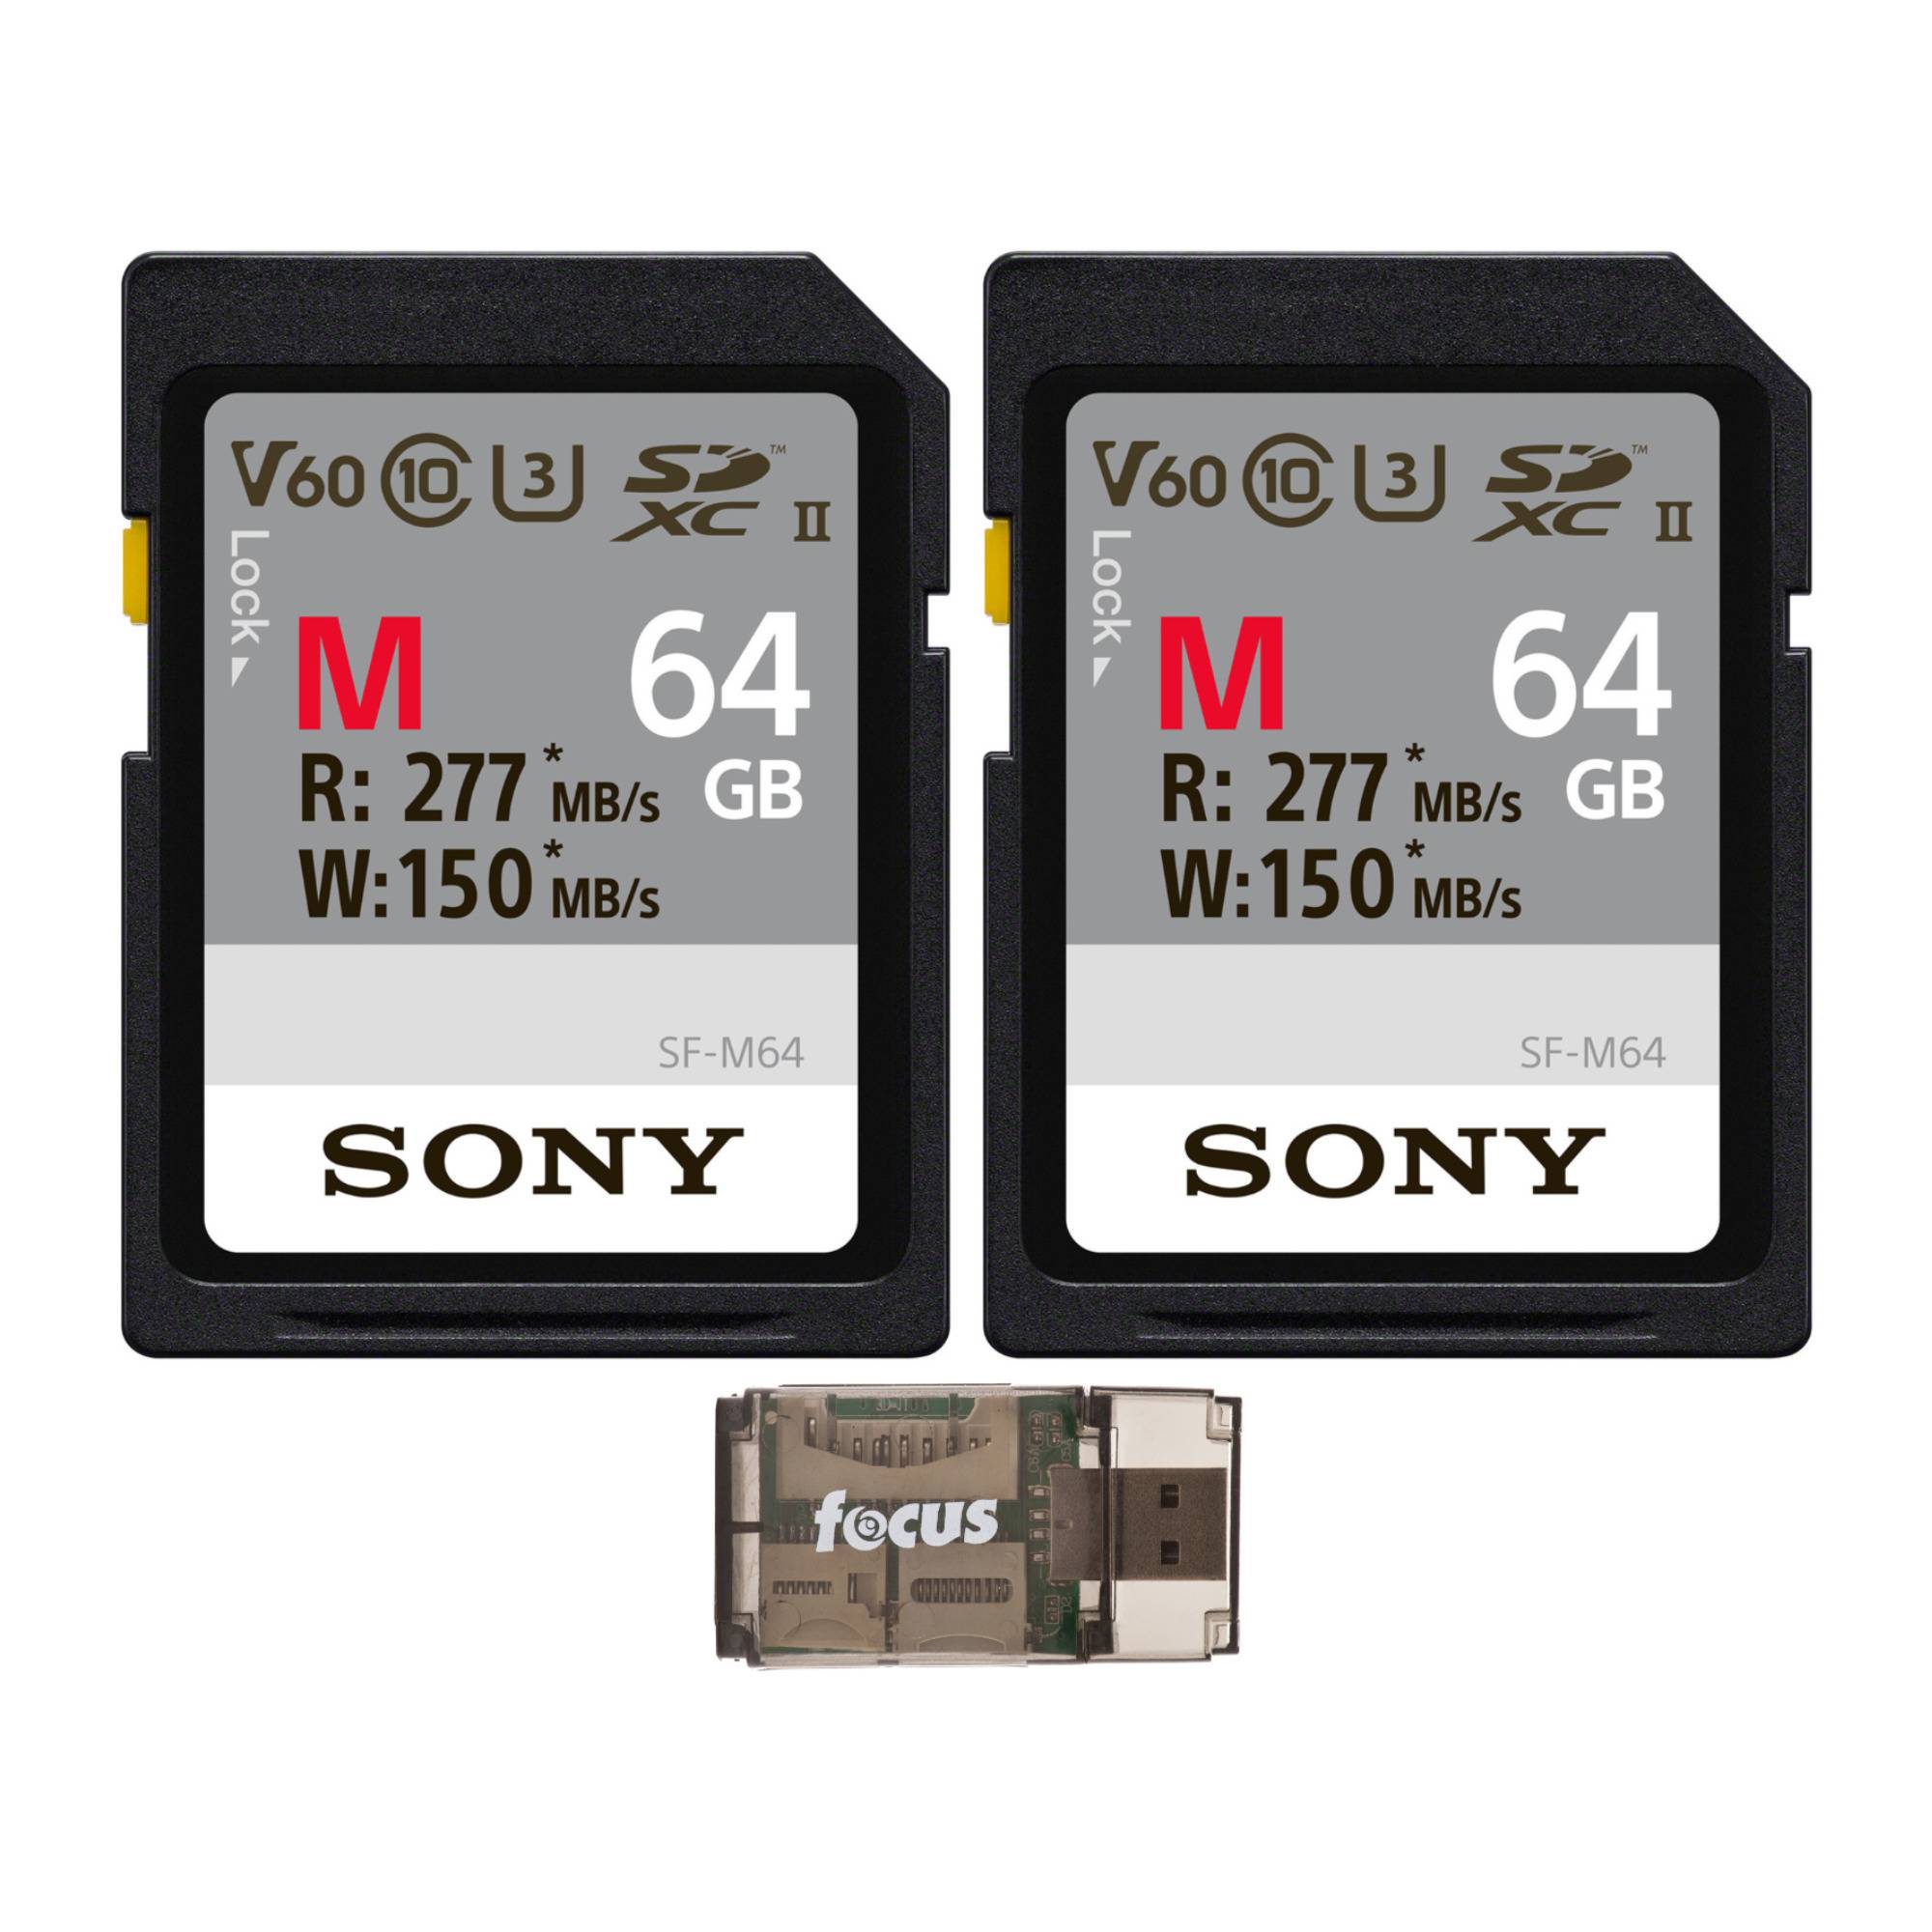 Sony 64GB V60 UHS-II M-Series Memory Card (2-Pack) with Focus USB 2.0 Card Reader